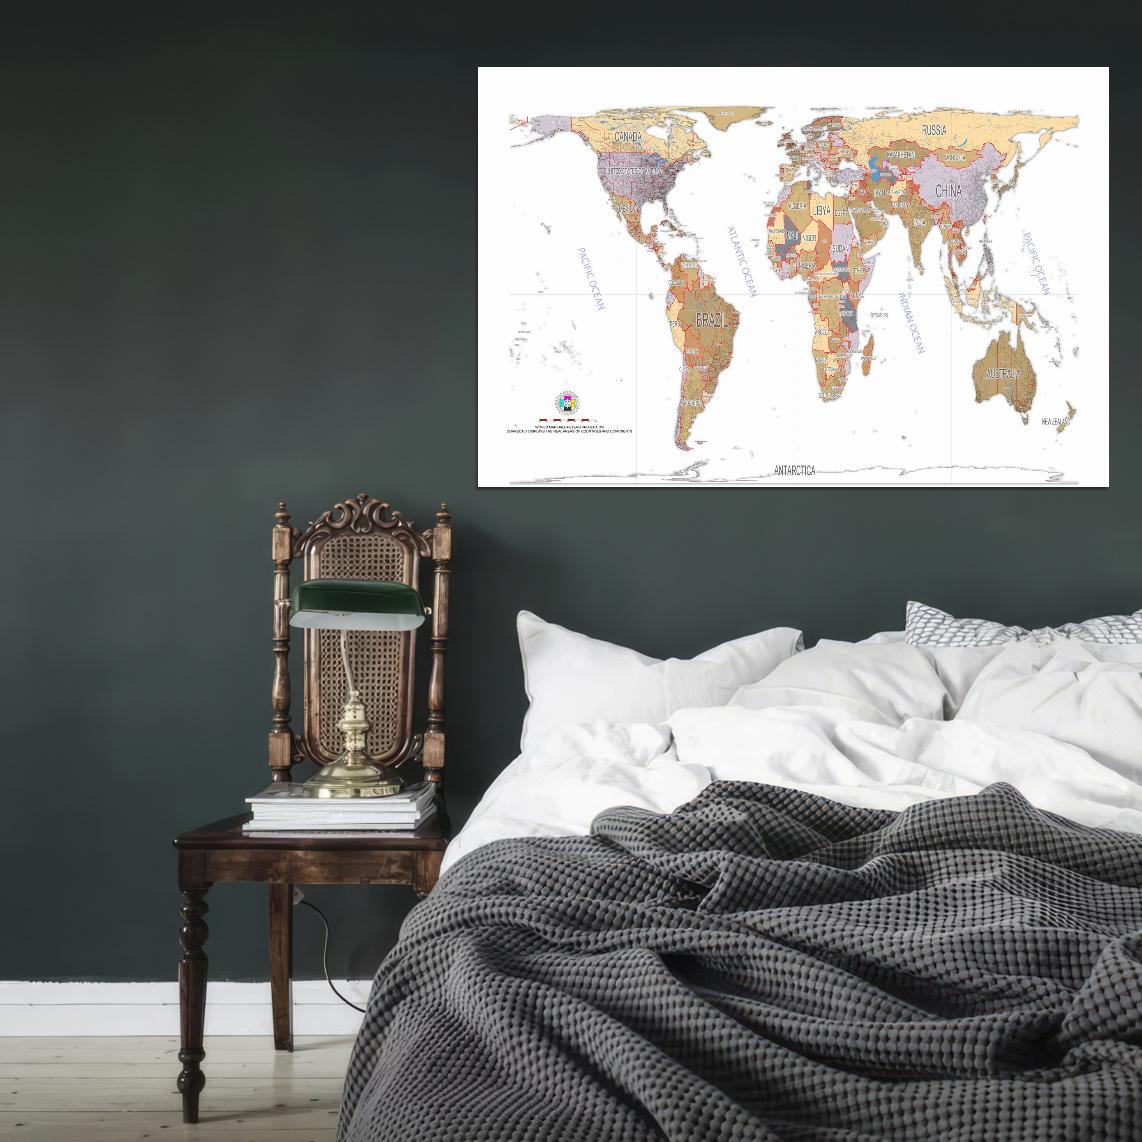 World Map Gall Peters Projection Detailed Country Names Light Colors Interactive Print Poster For Wall Mapology Vintage Topographic Atlas Travel Map Сlassroom School